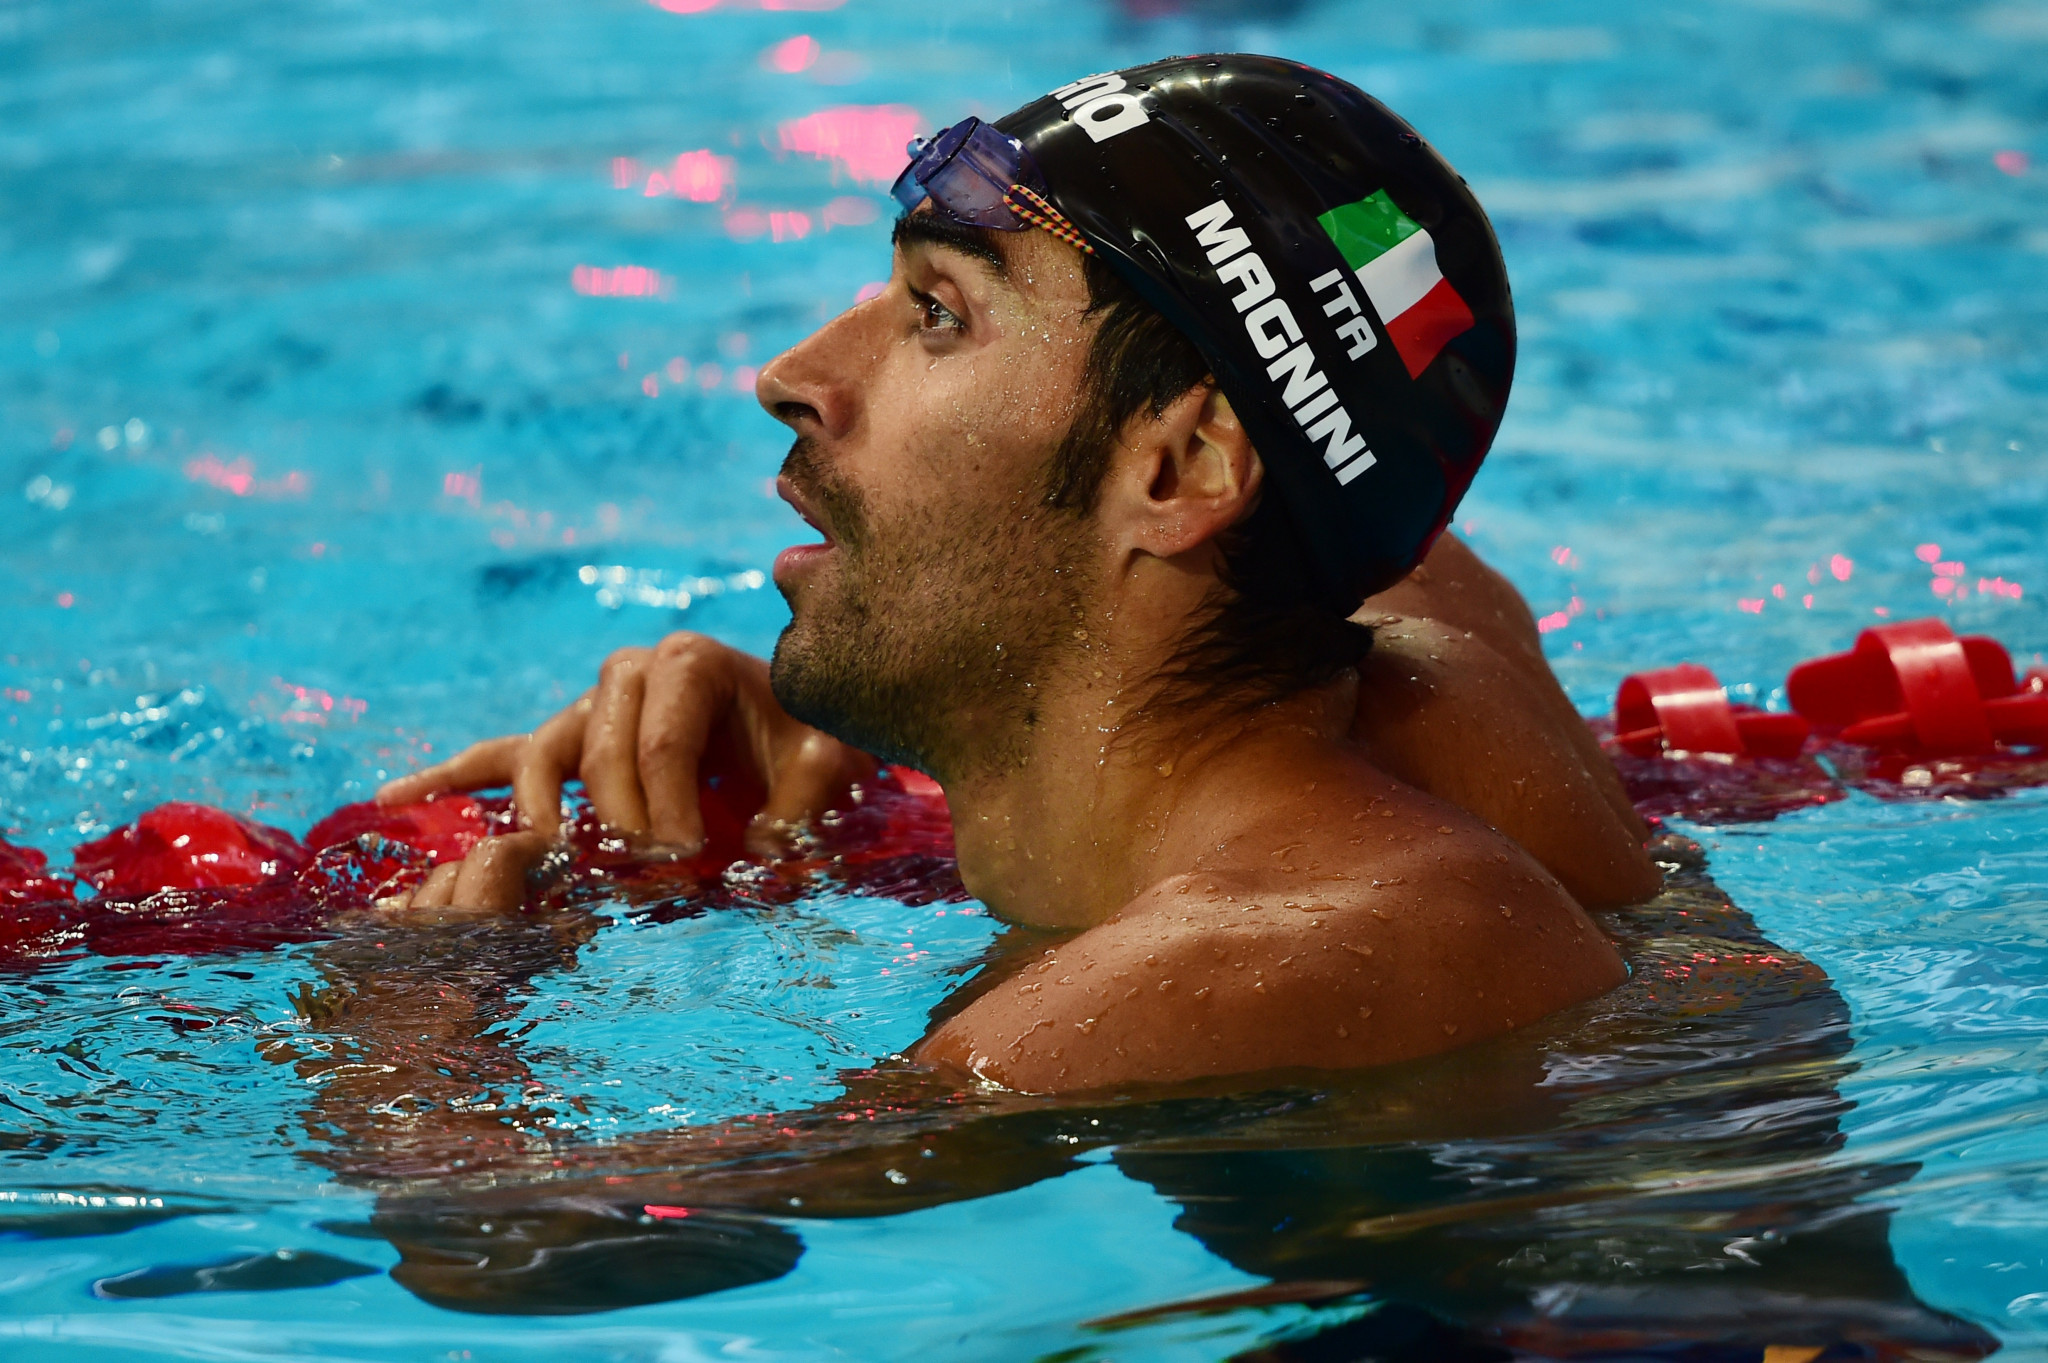 Filippo Magnini won two World Championships gold medals and a bronze during his career ©Getty Images